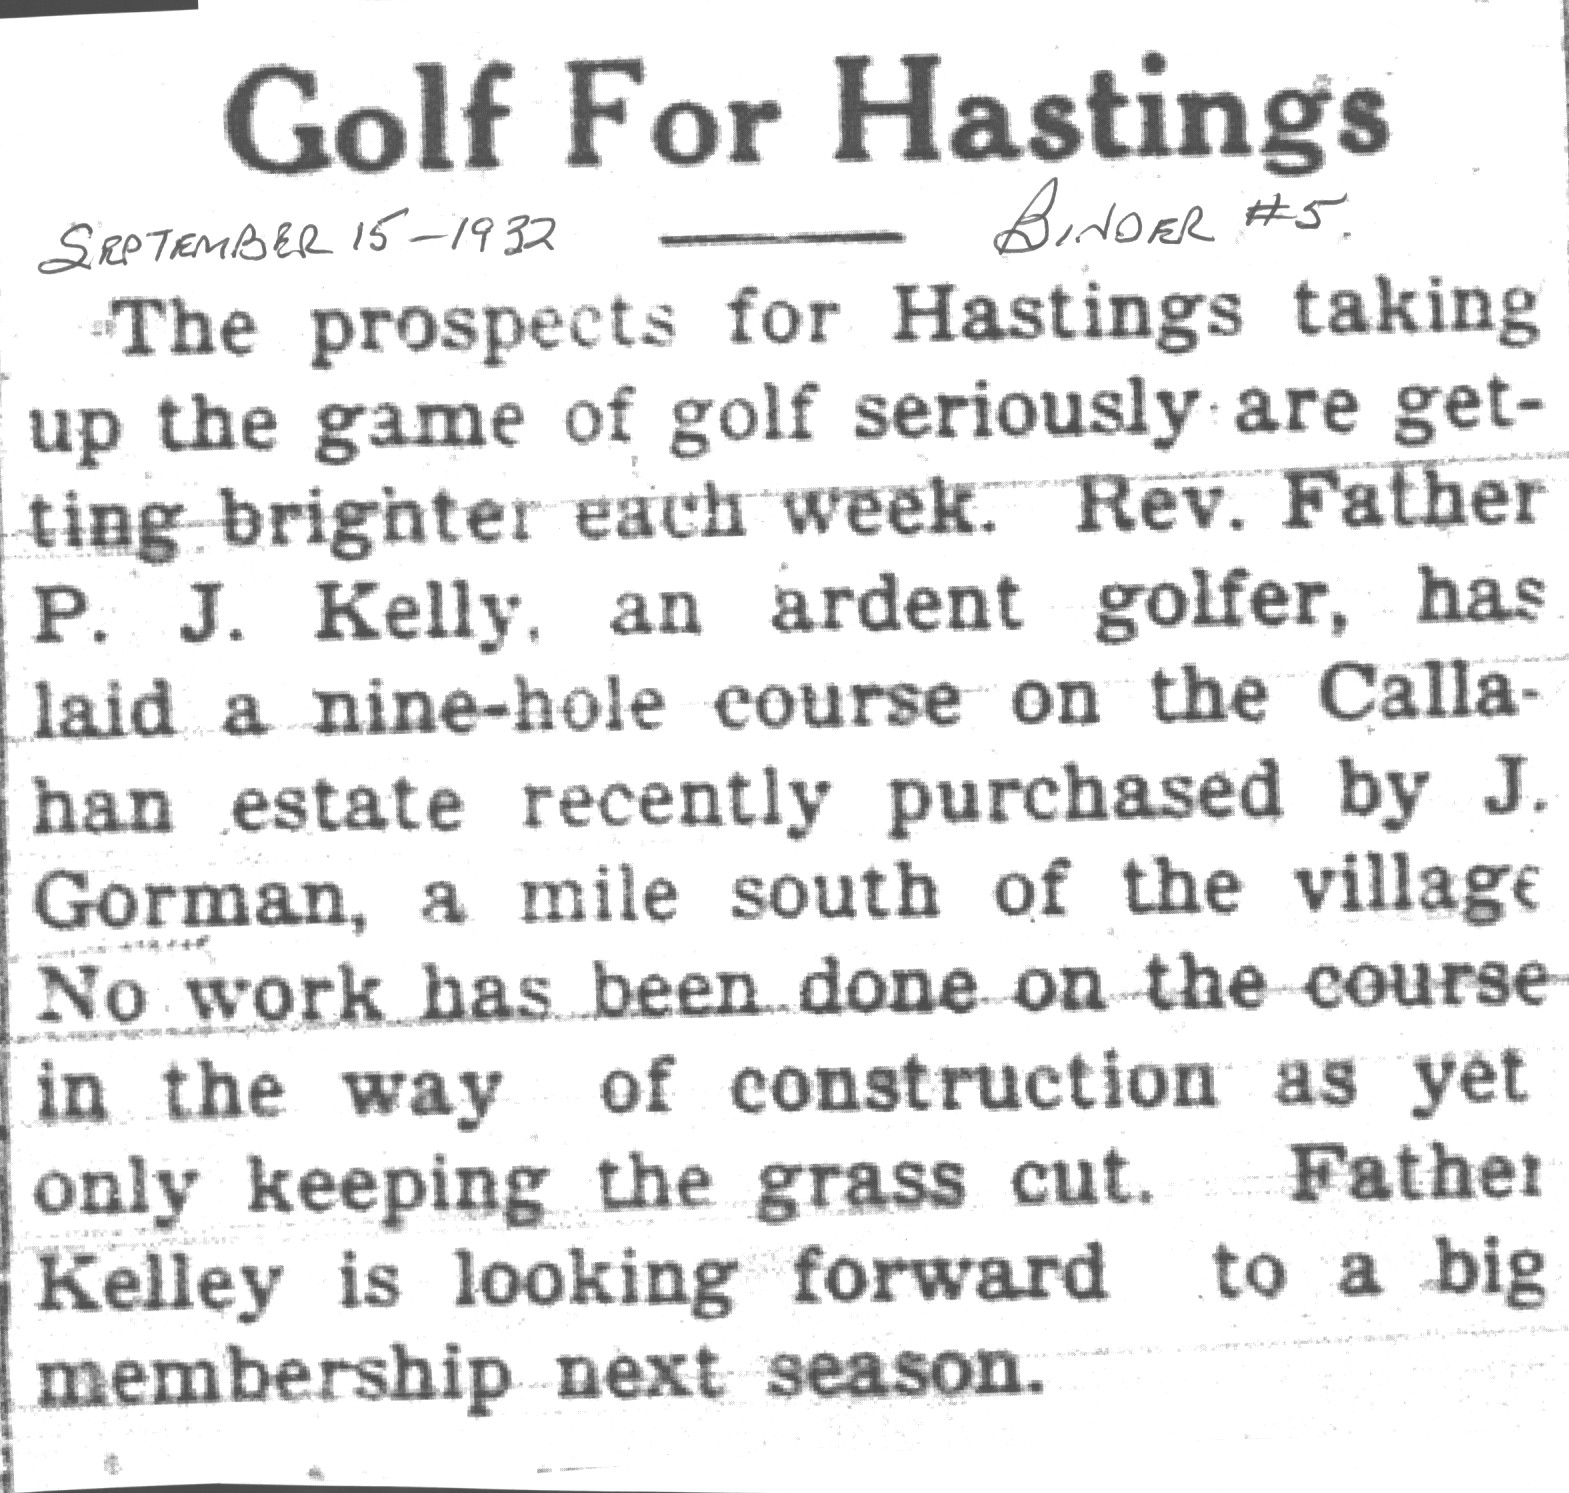 1932-09-15 Golf -Possible course in Hastings